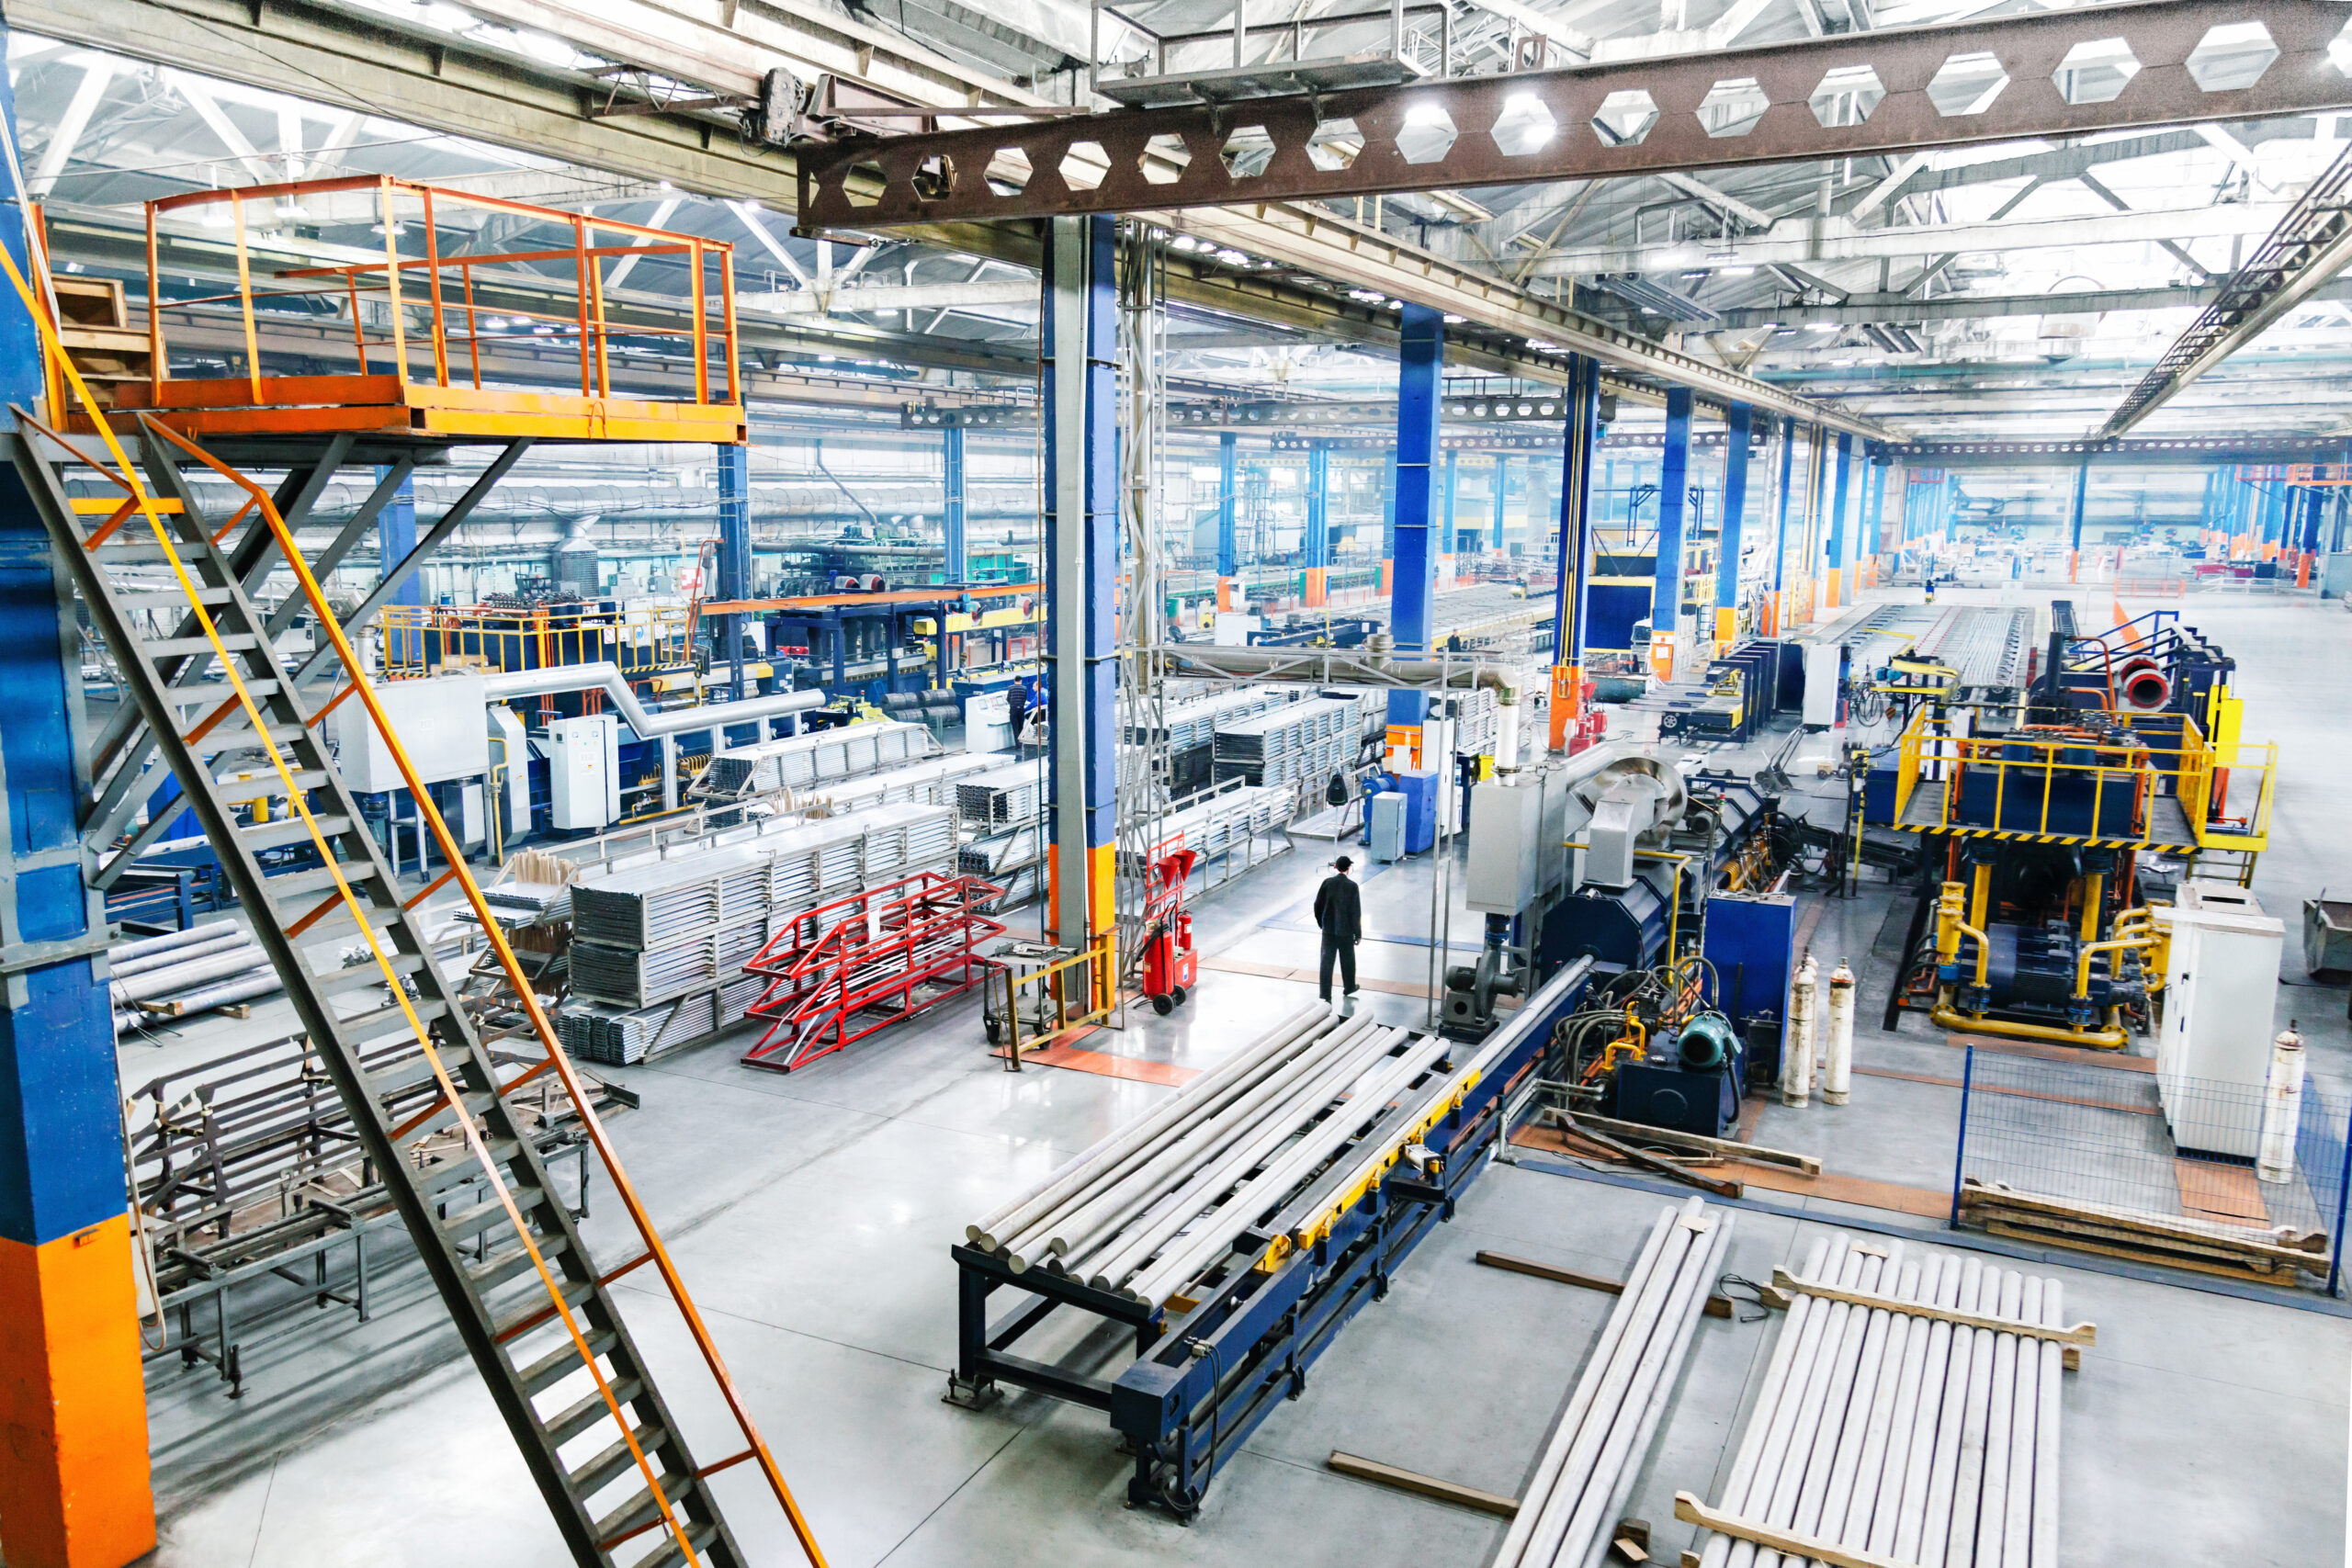 Top 10 Most Common Safety Hazards in Manufacturing